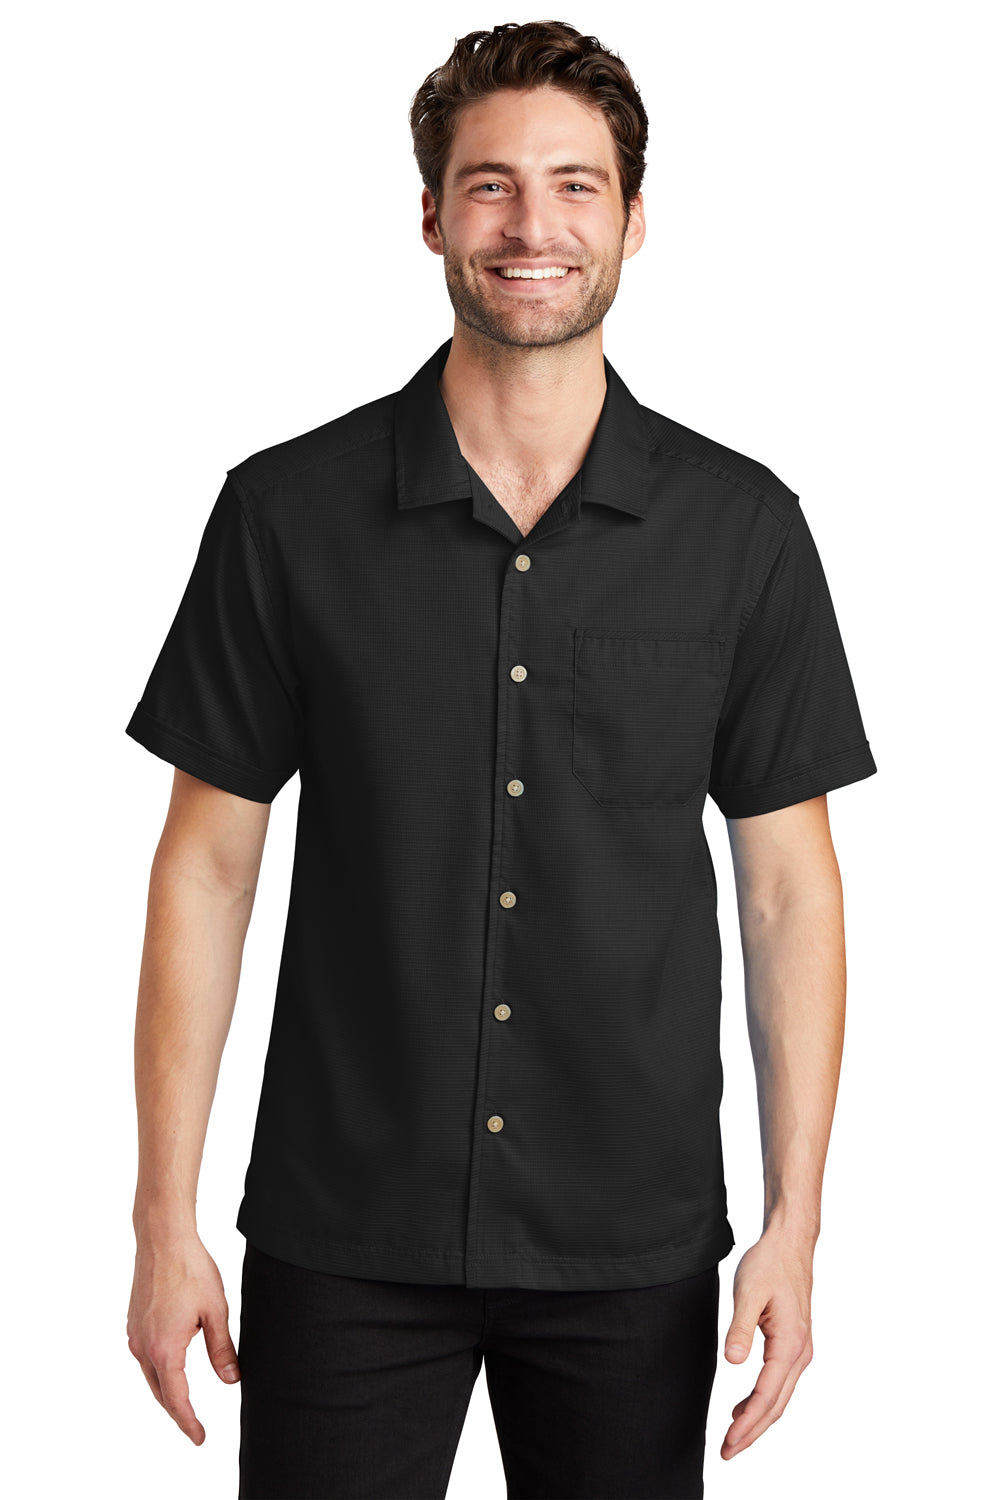 Port Authority S662 Mens Wrinkle Resistant Short Sleeve Button Down Camp Shirt w/ Pocket Black Front